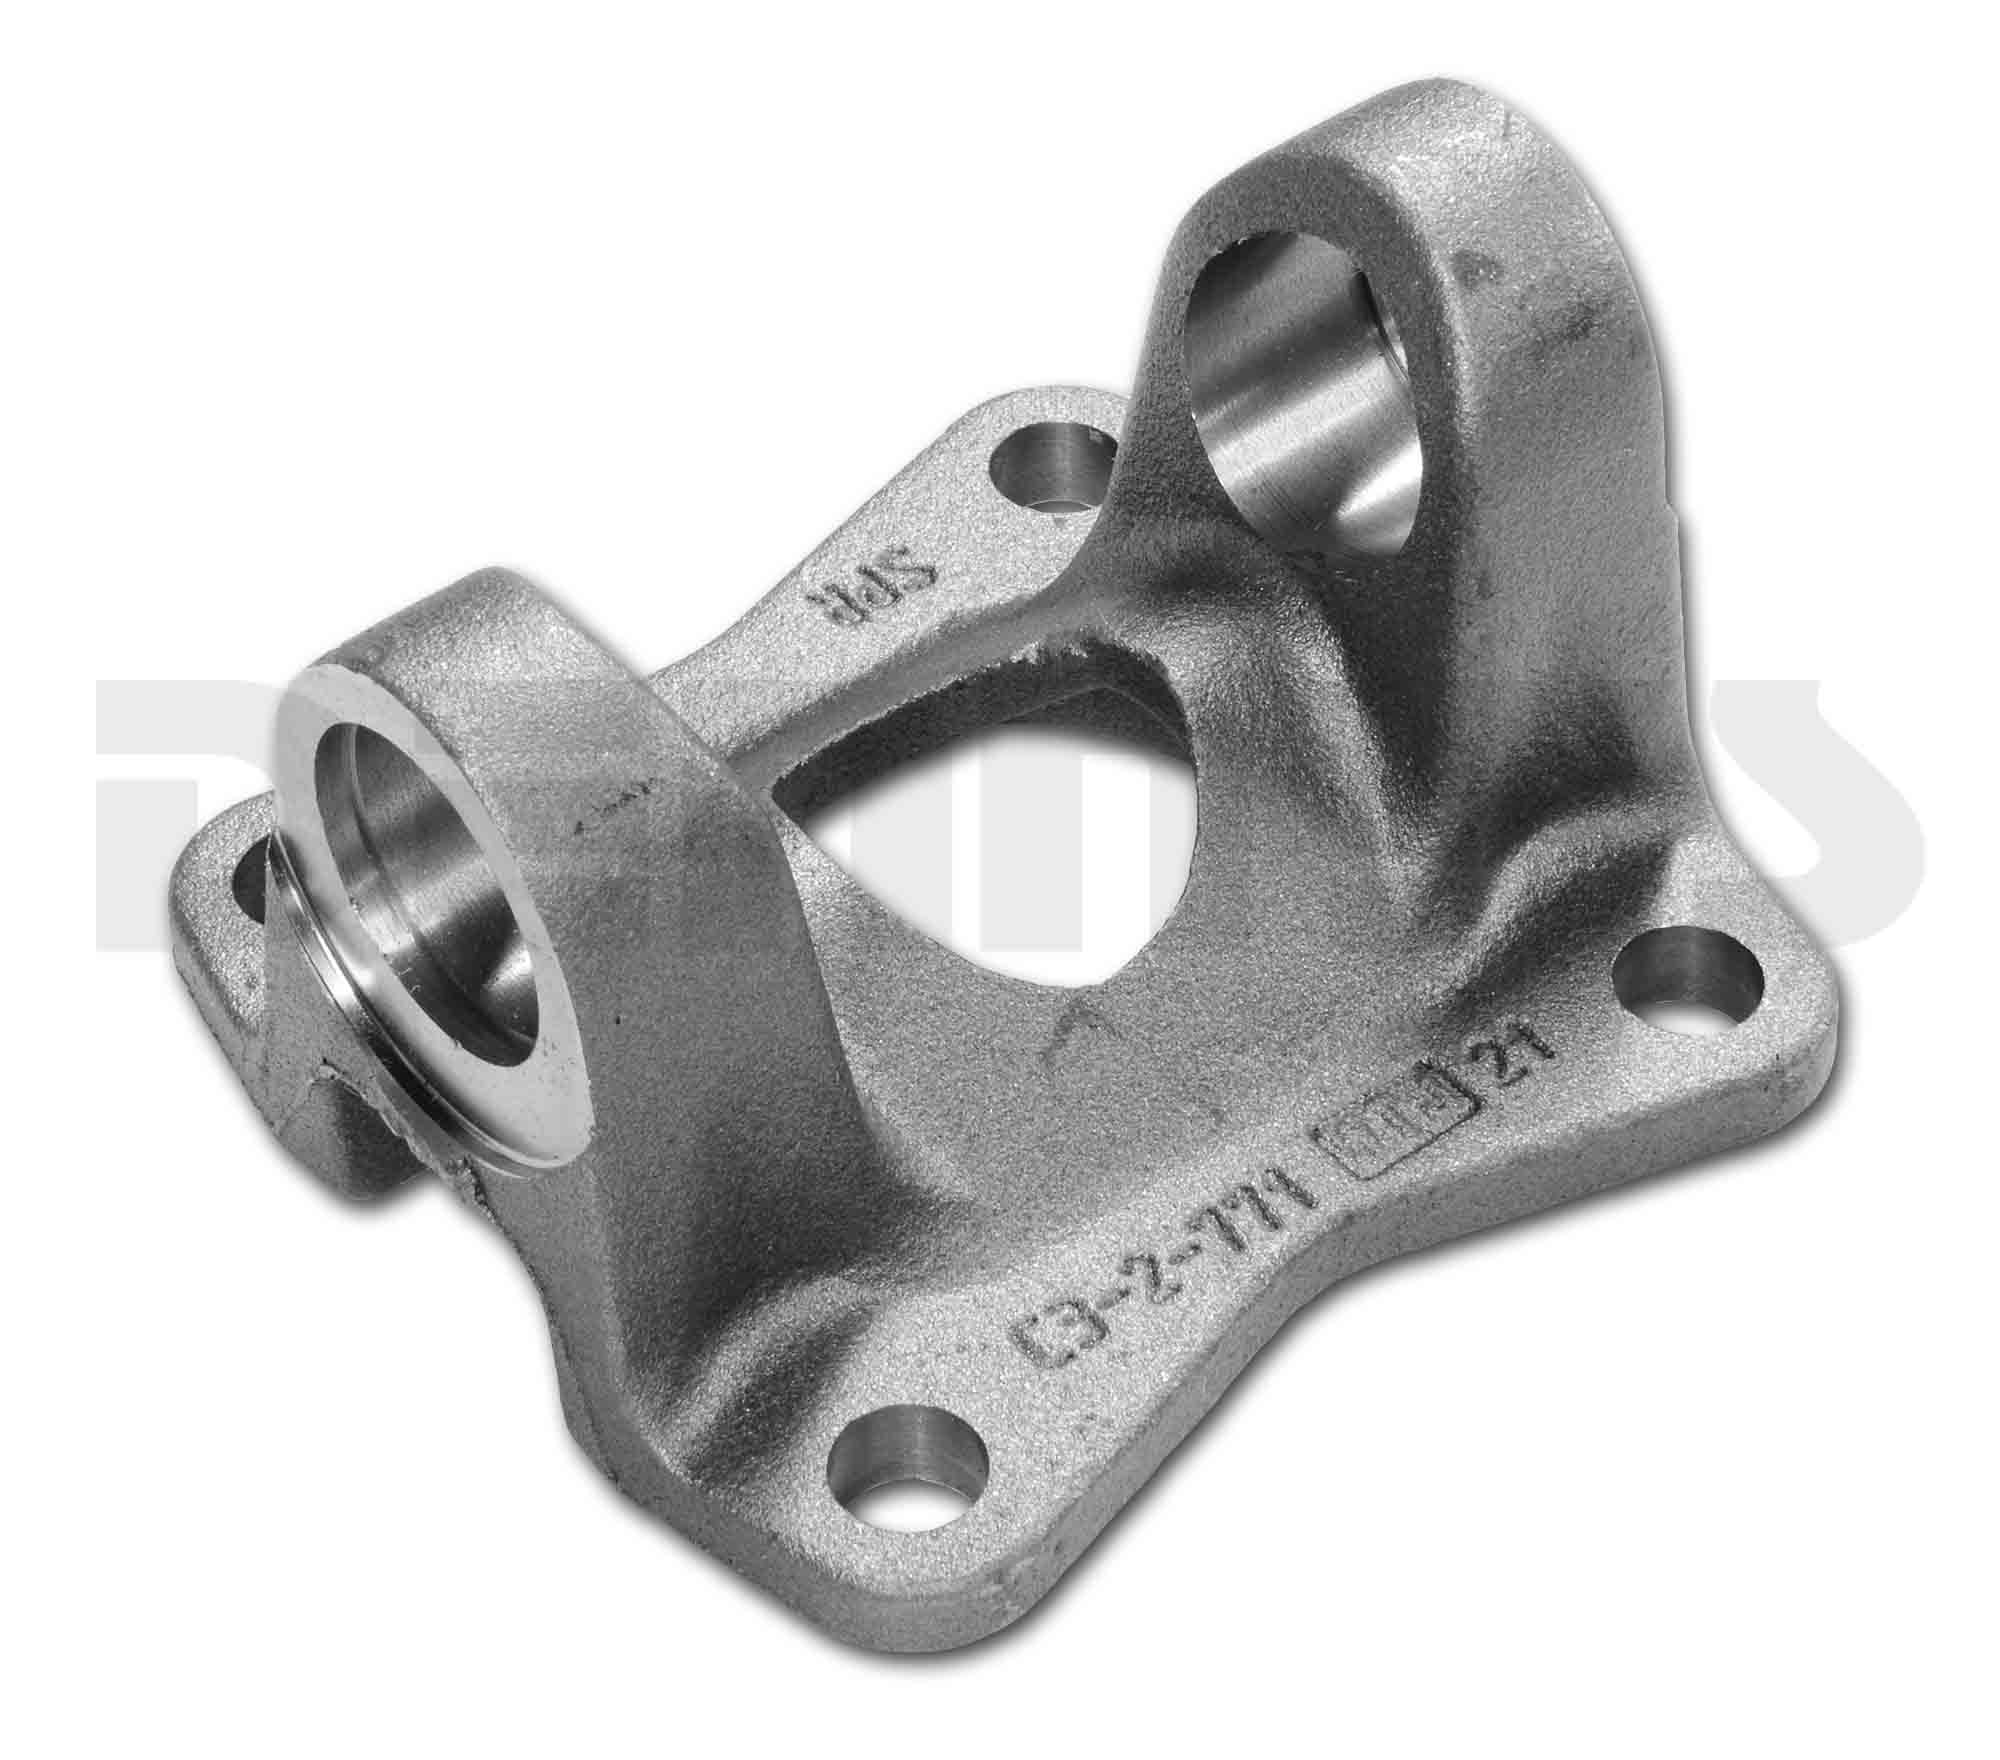 Flange yokes in stock at Denny's Driveshafts